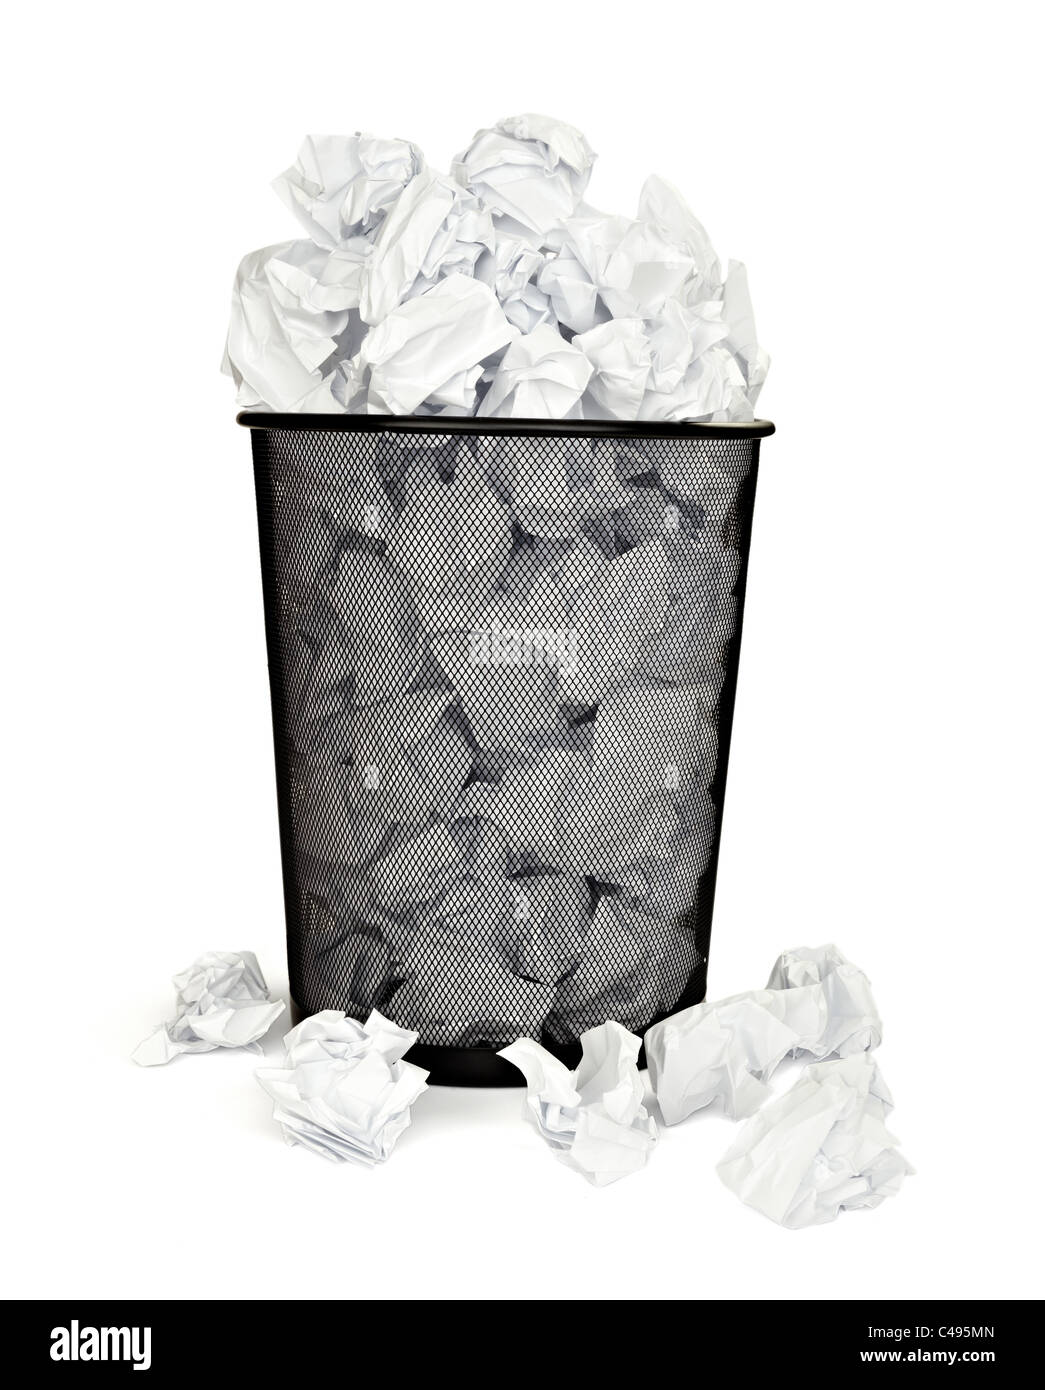 close up of waste paper basket Stock Photo